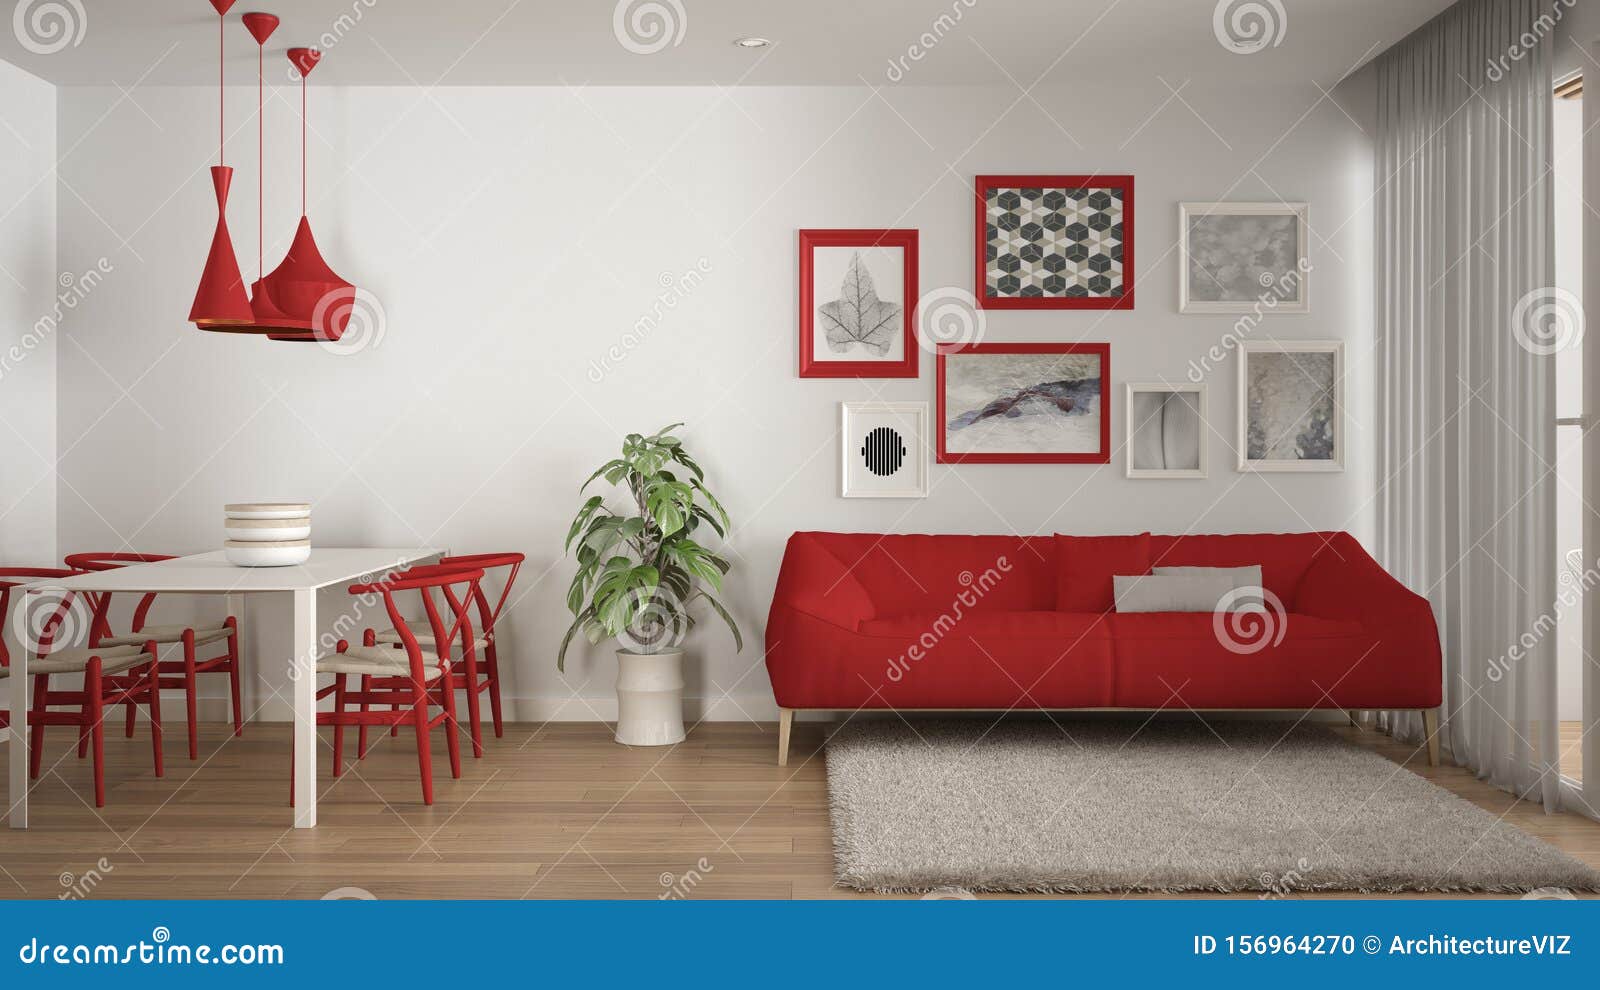 warm and confortable colored white and red living room with dining table, sofa and fur carpet, potted plant and parquet floor,